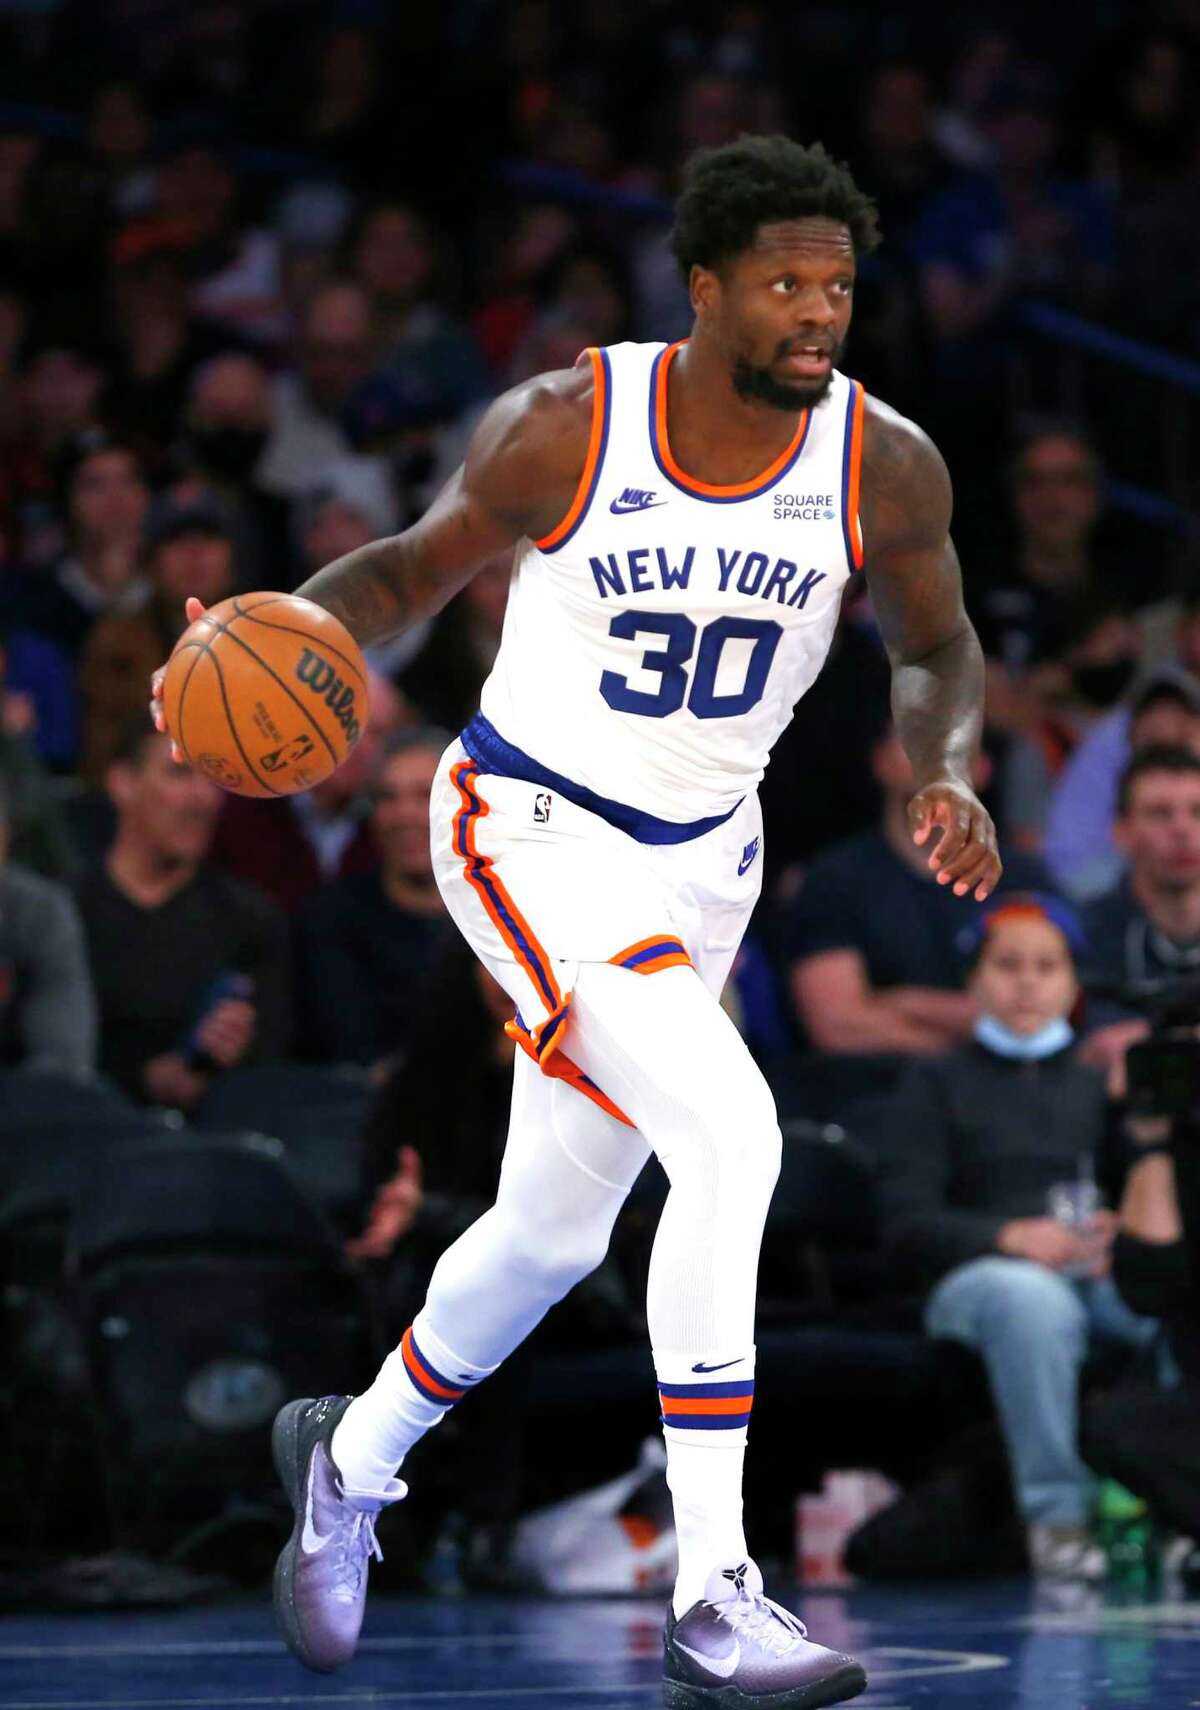 Julius Randle and the Knicks face the Warriors at Madison Square Garden at 4:30 p.m. Tuesday (NBCSBA, TNT/95.7).